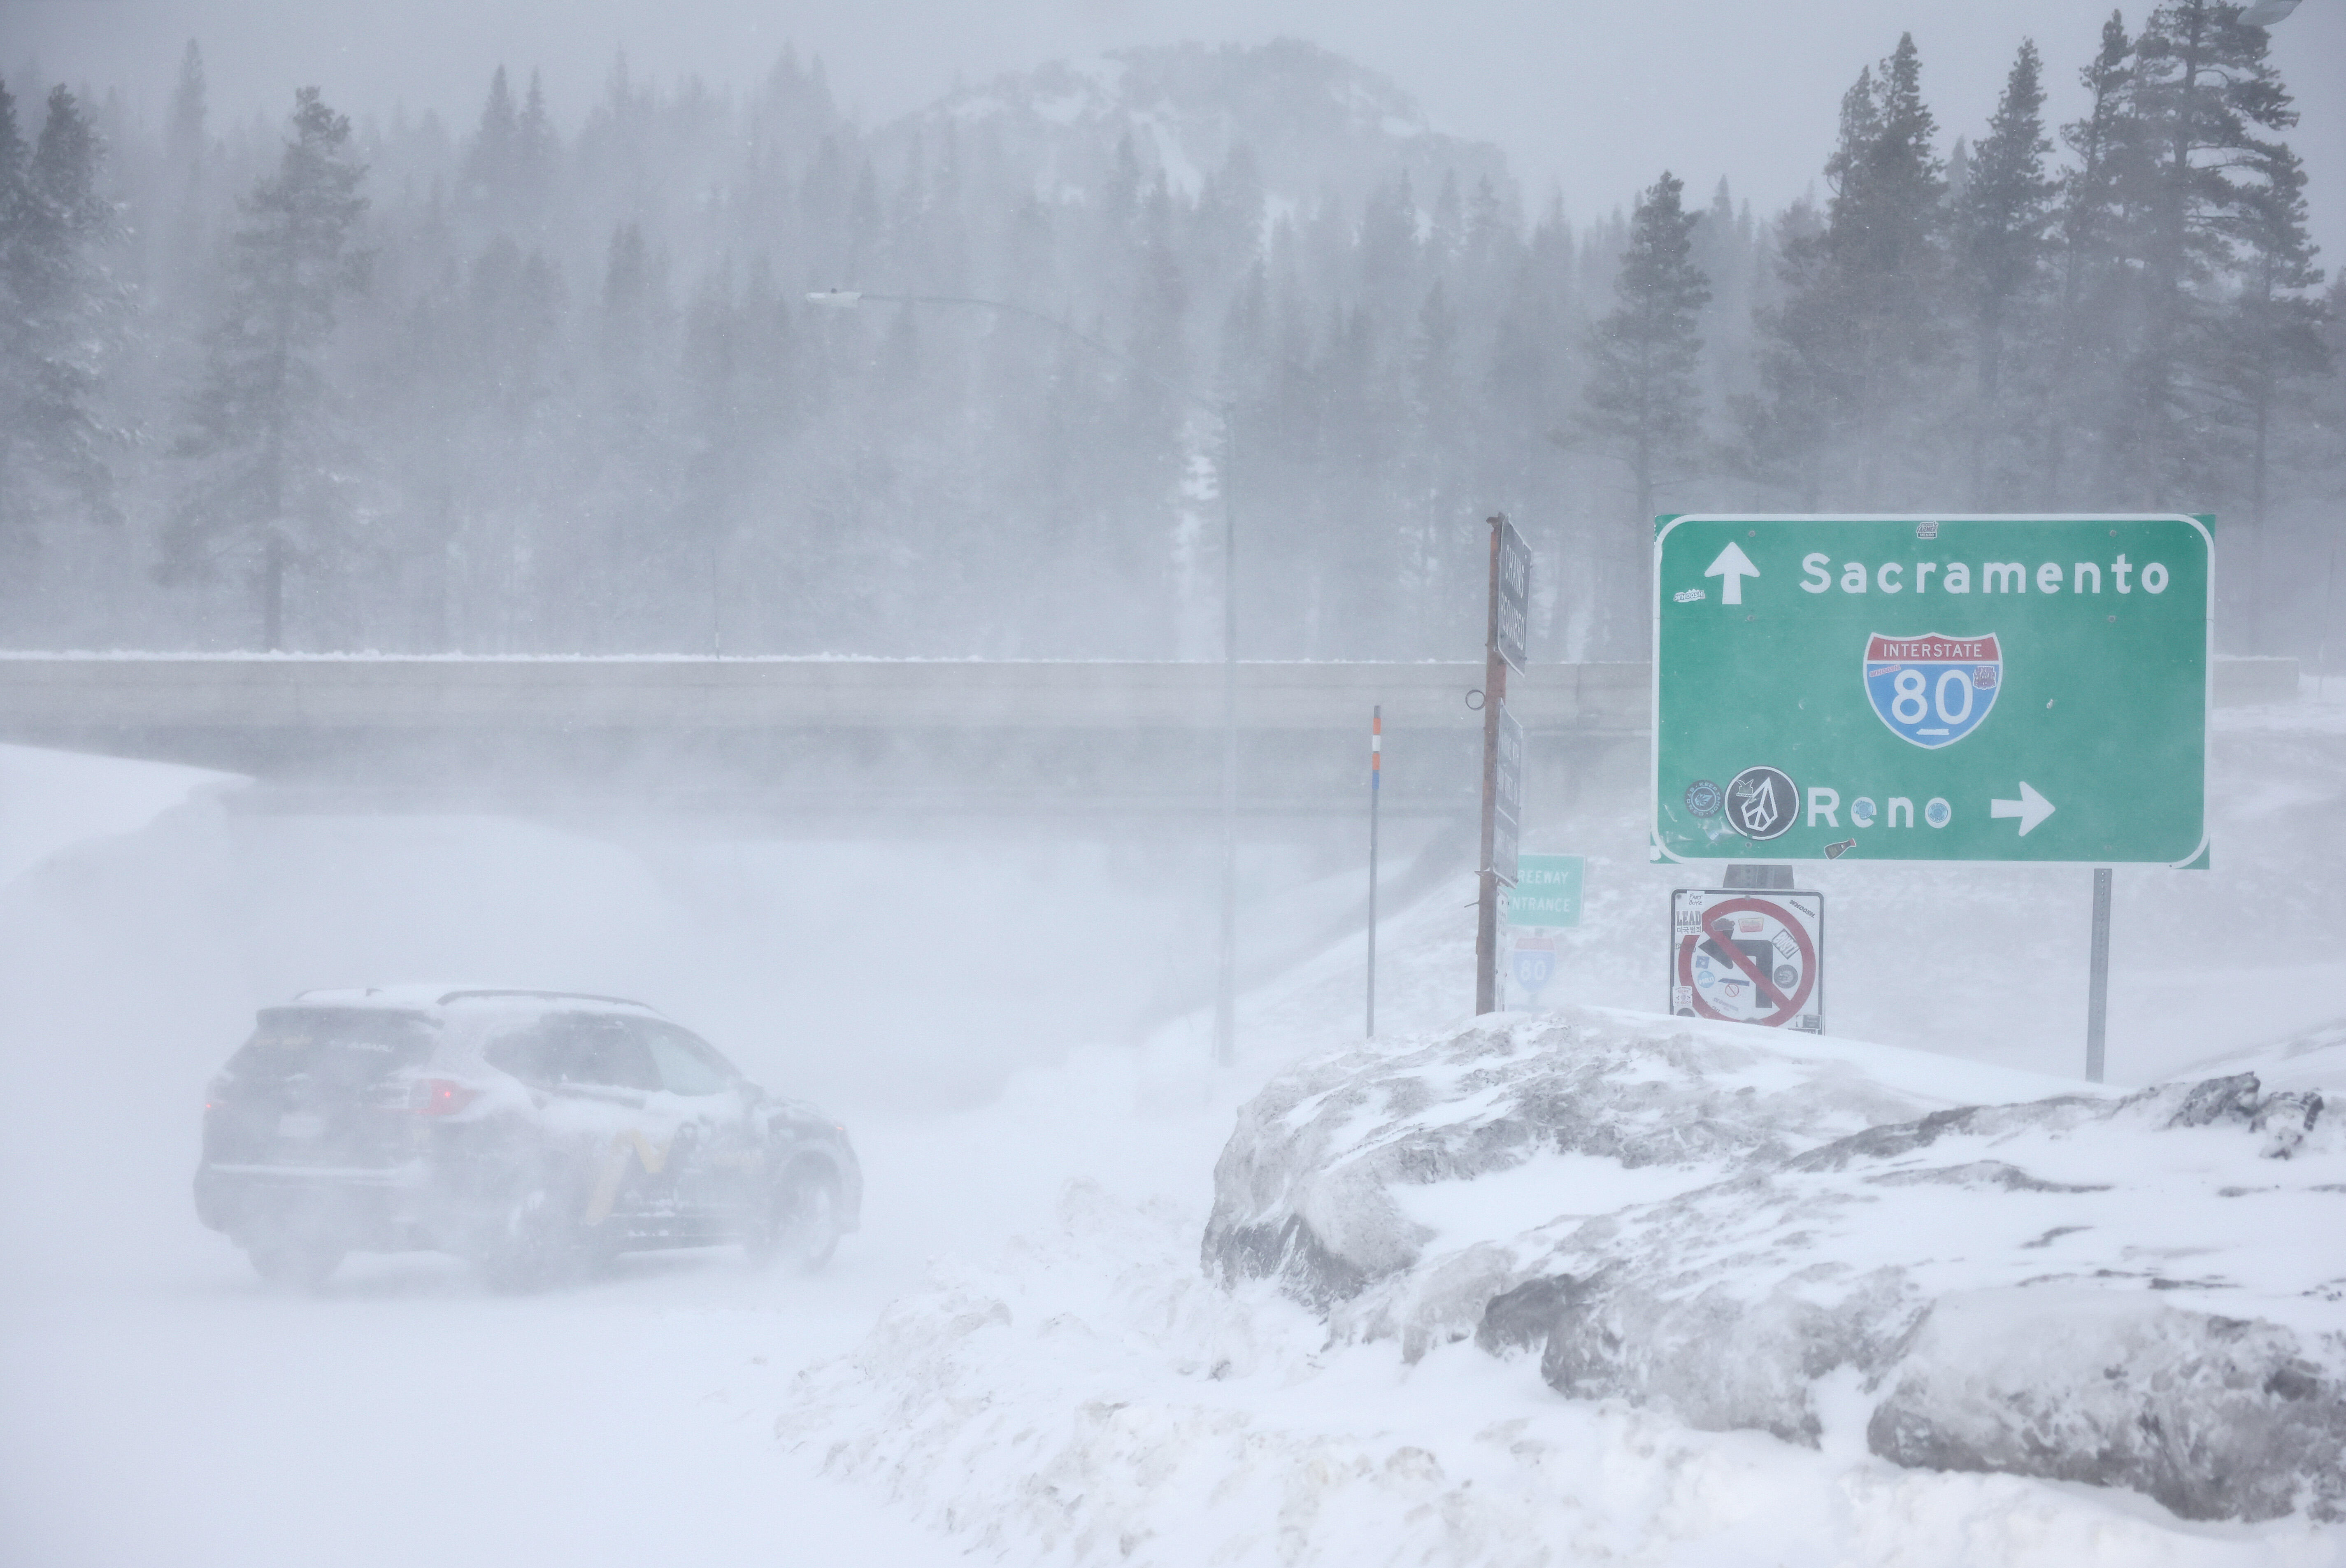 Life-Threatening Blizzard Slams California With Snow, 140+ MPH Wind Gusts